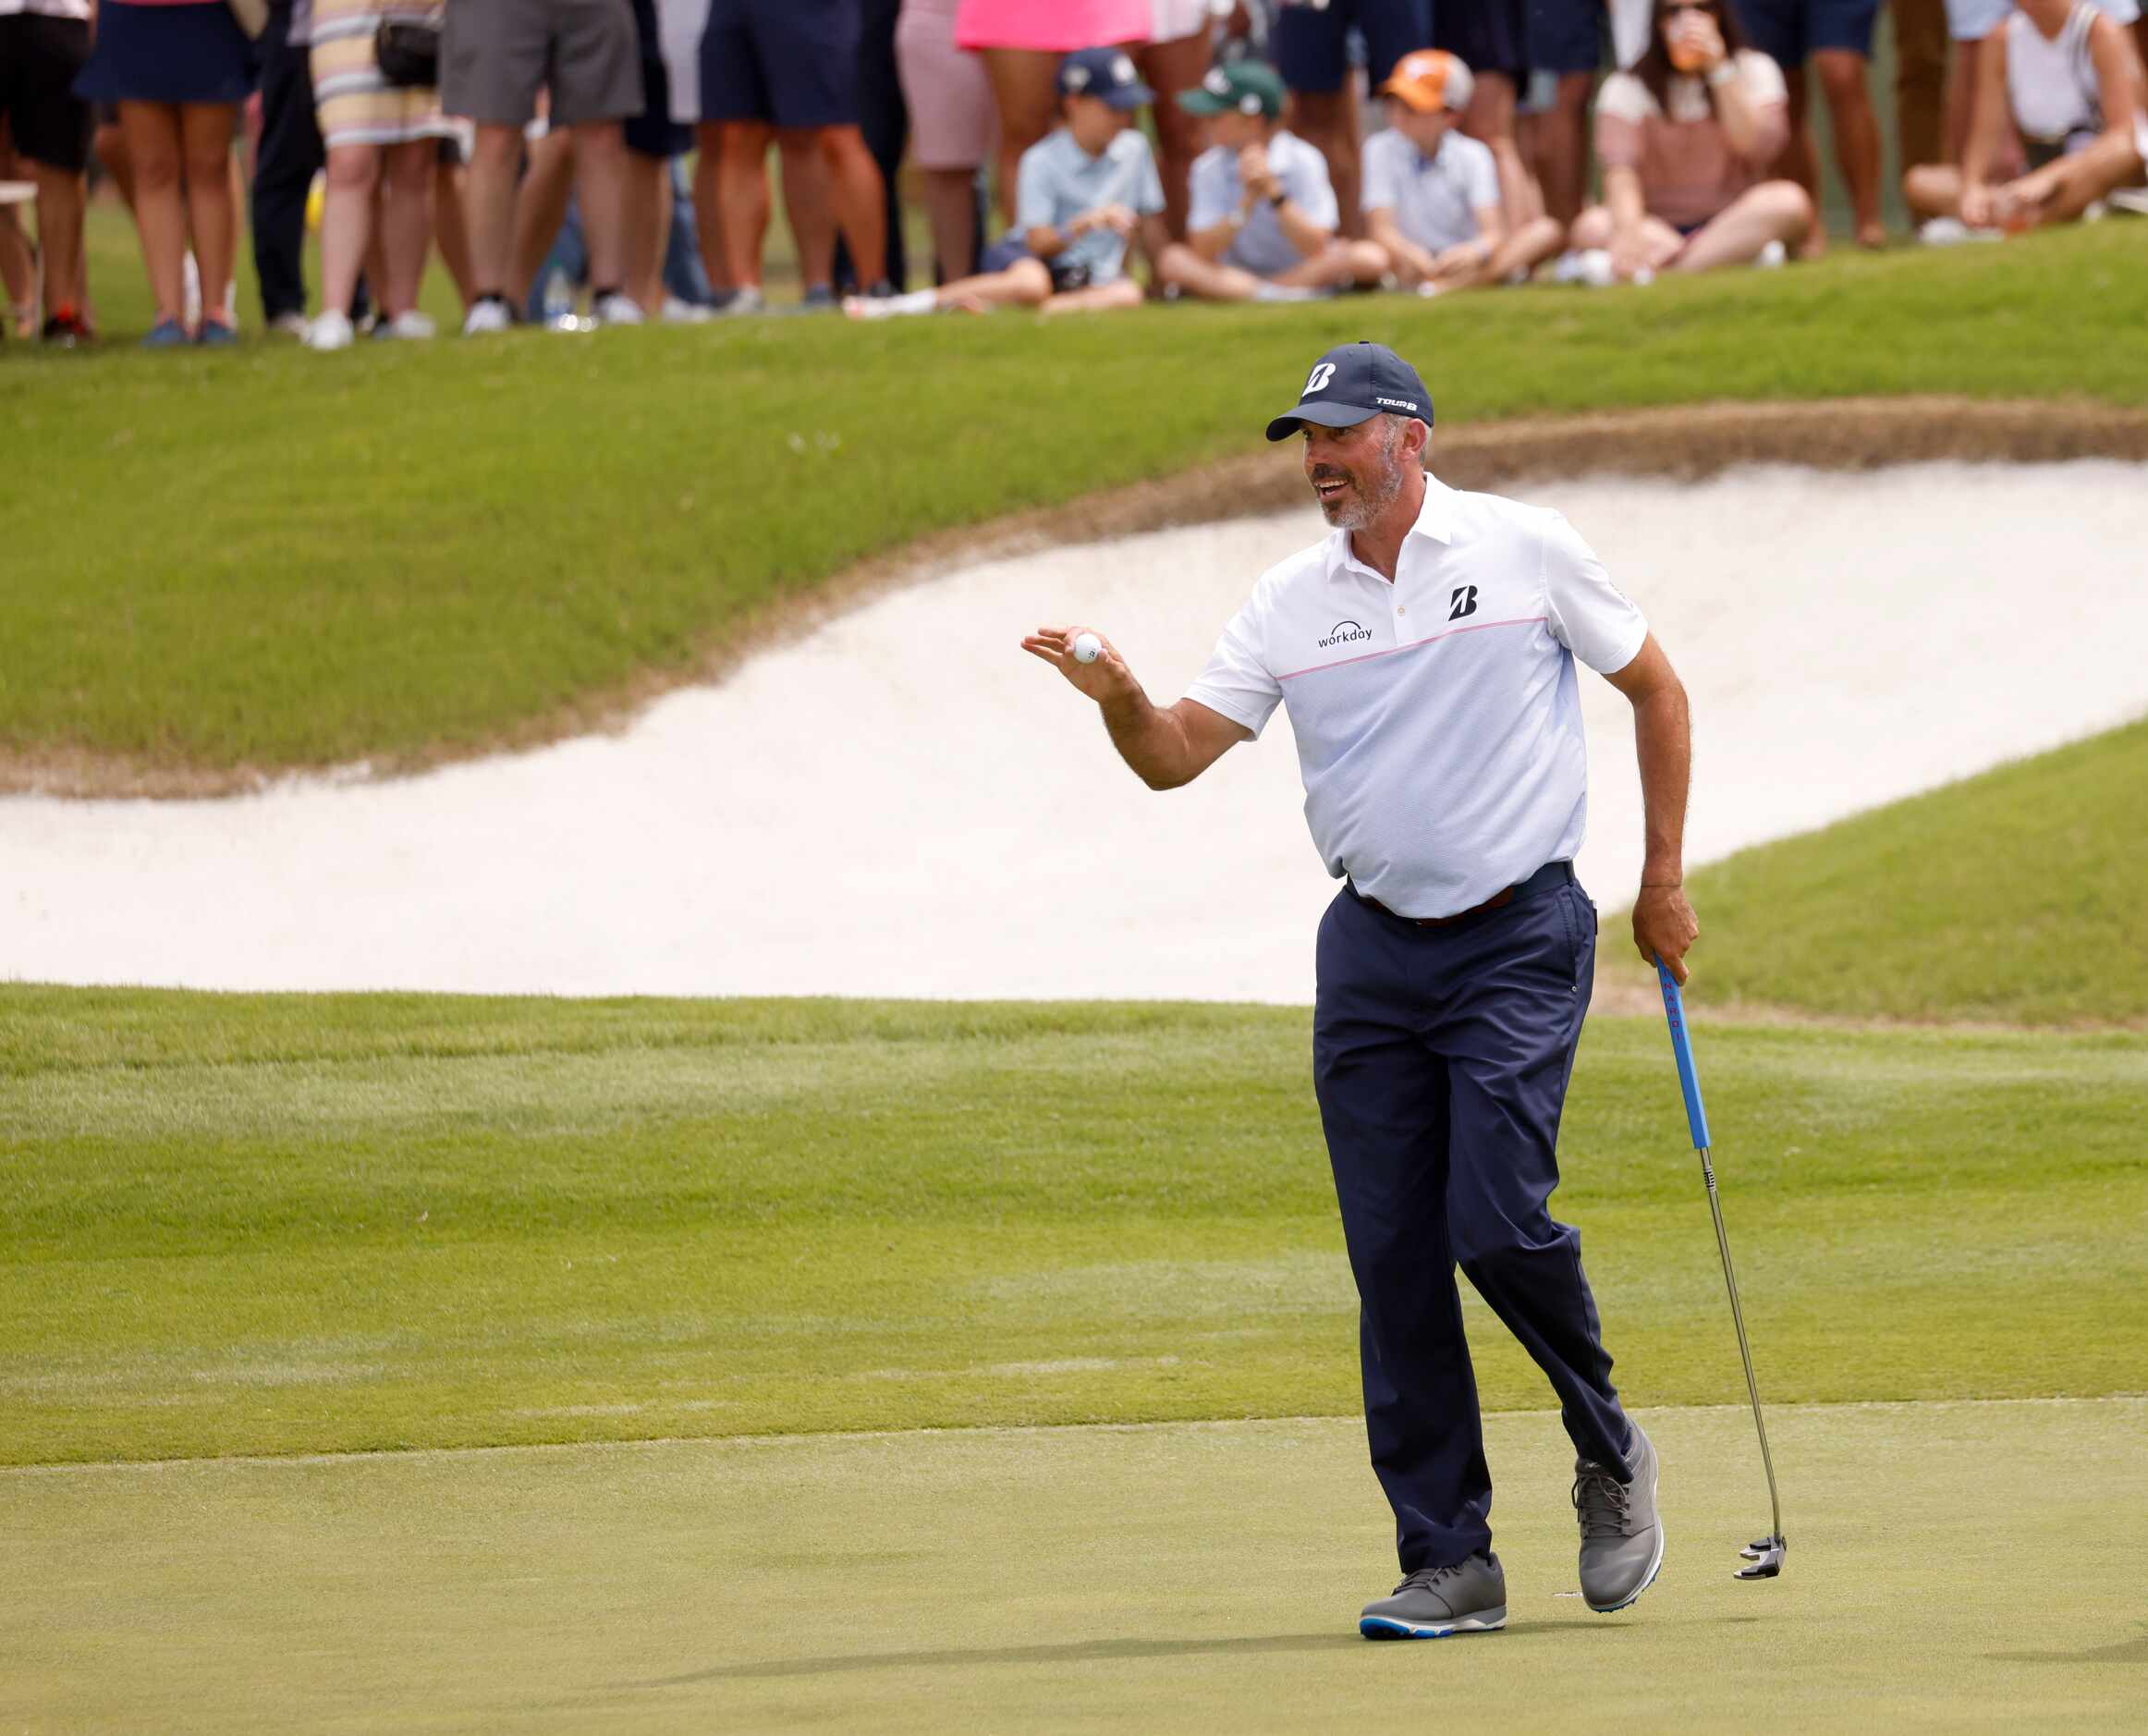 Matt Kuchar acknowledges the crowd after getting a birdie on the 12th hole during round 3 of...